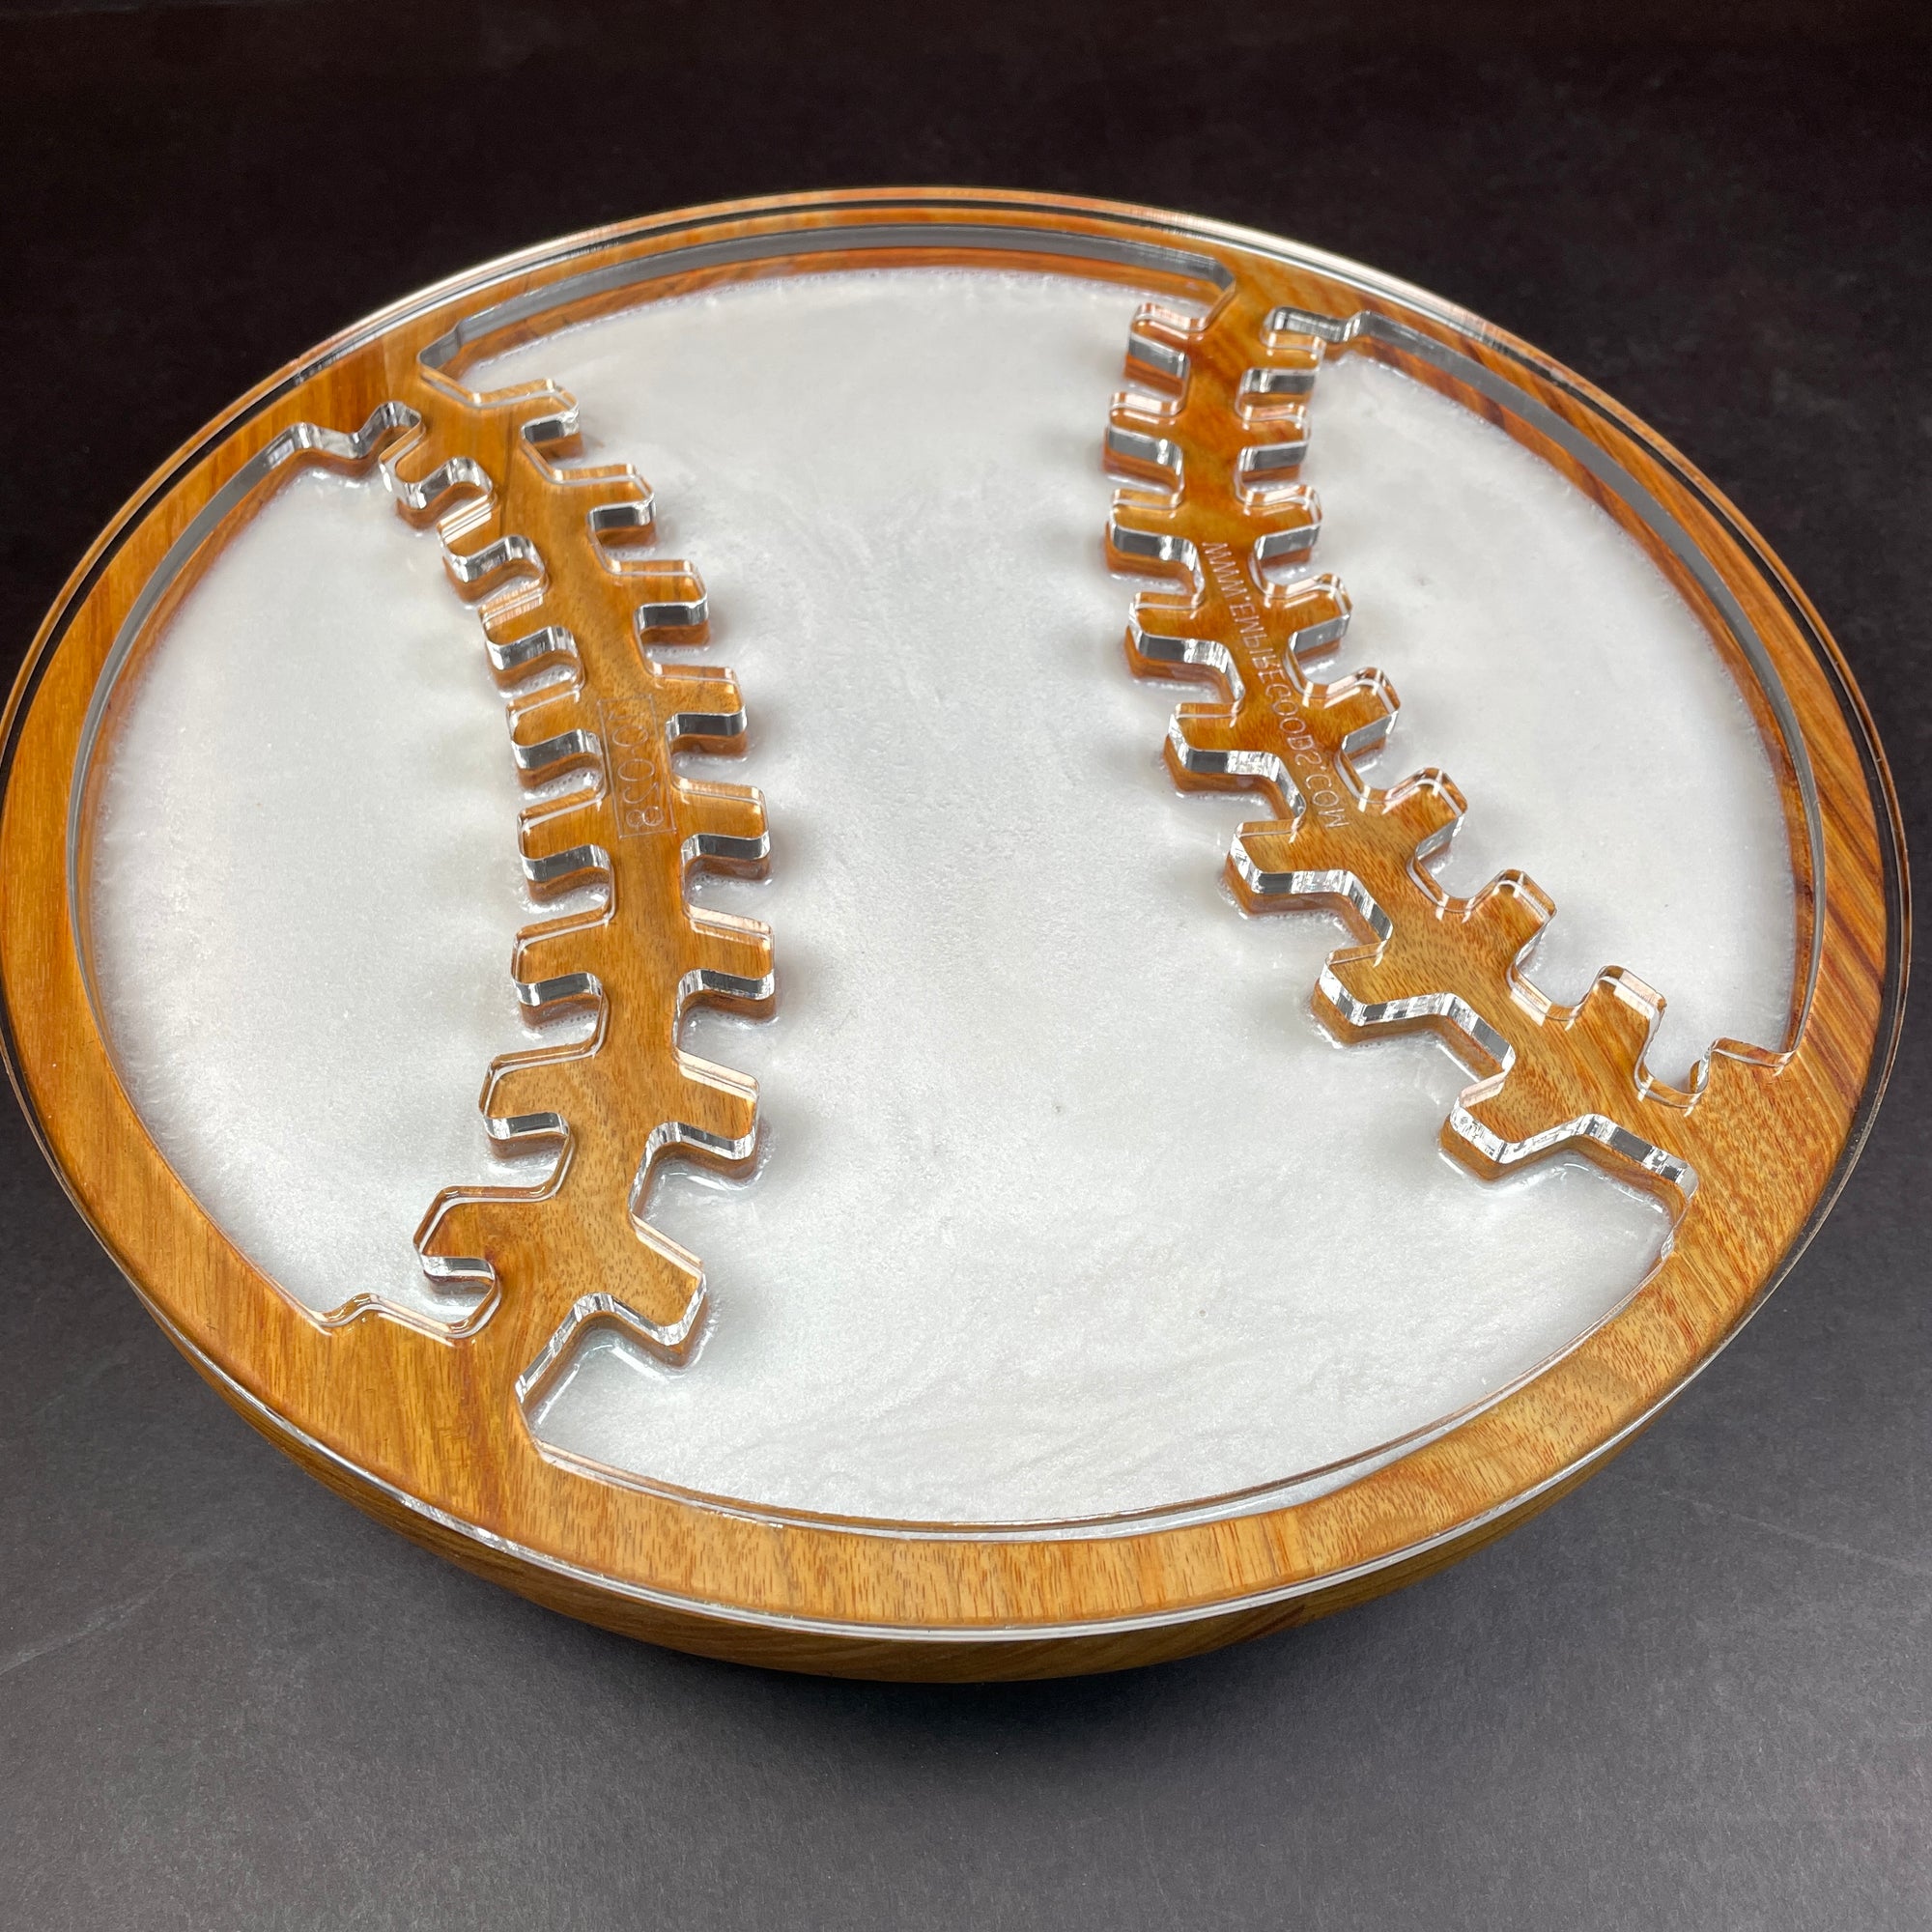 Baseball Serving Tray Router Template